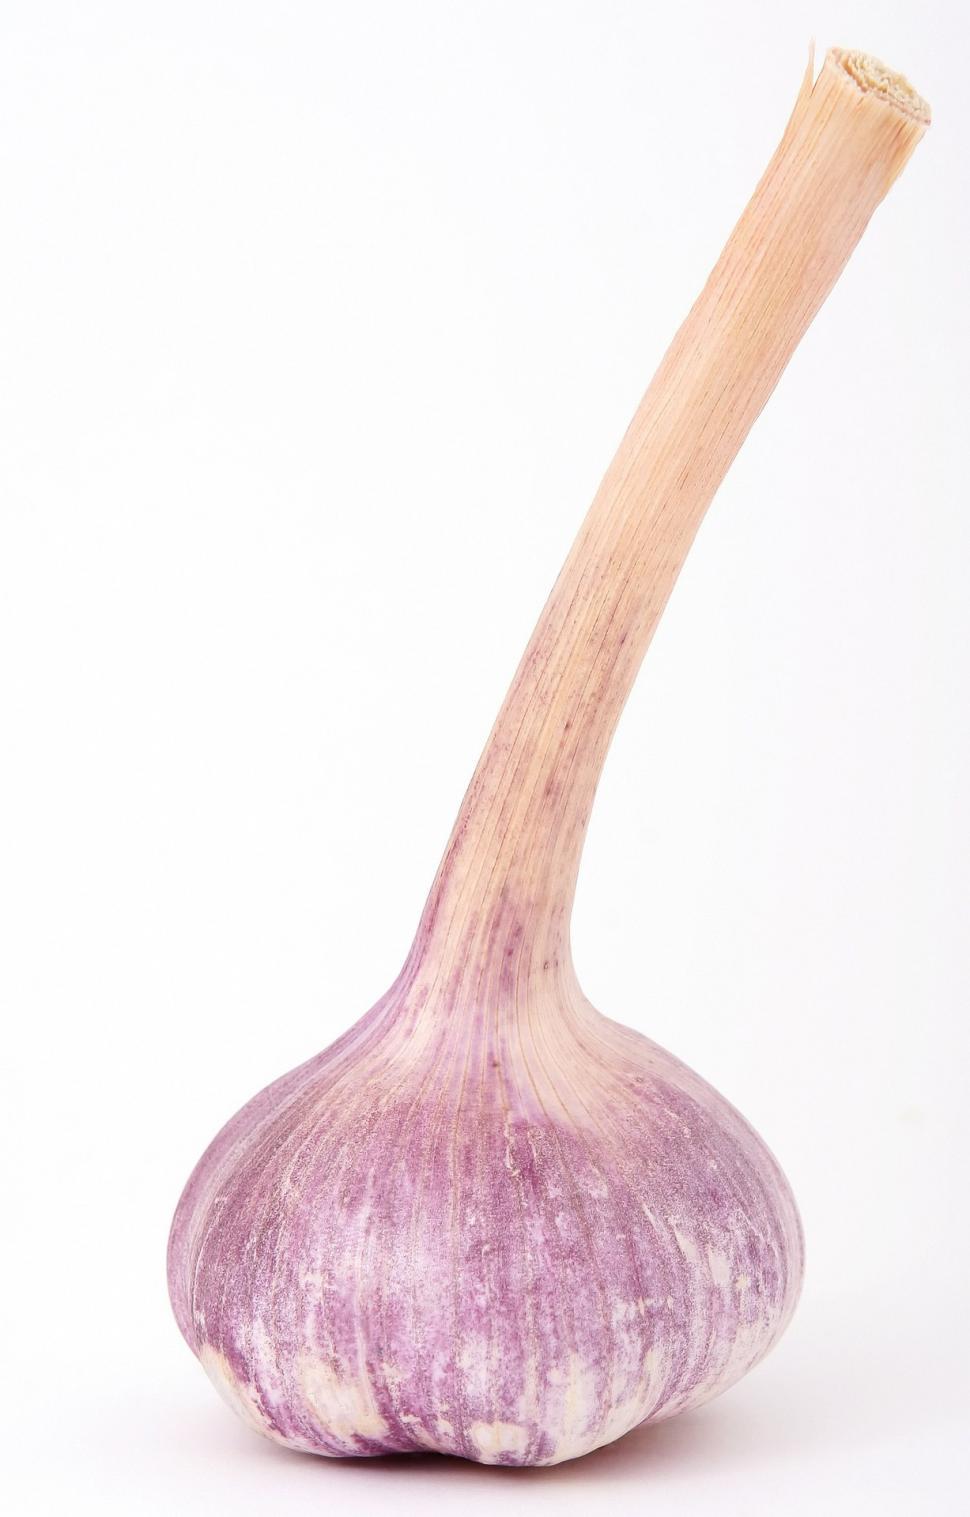 Free Image of Onion With Wooden Stem on White Background 